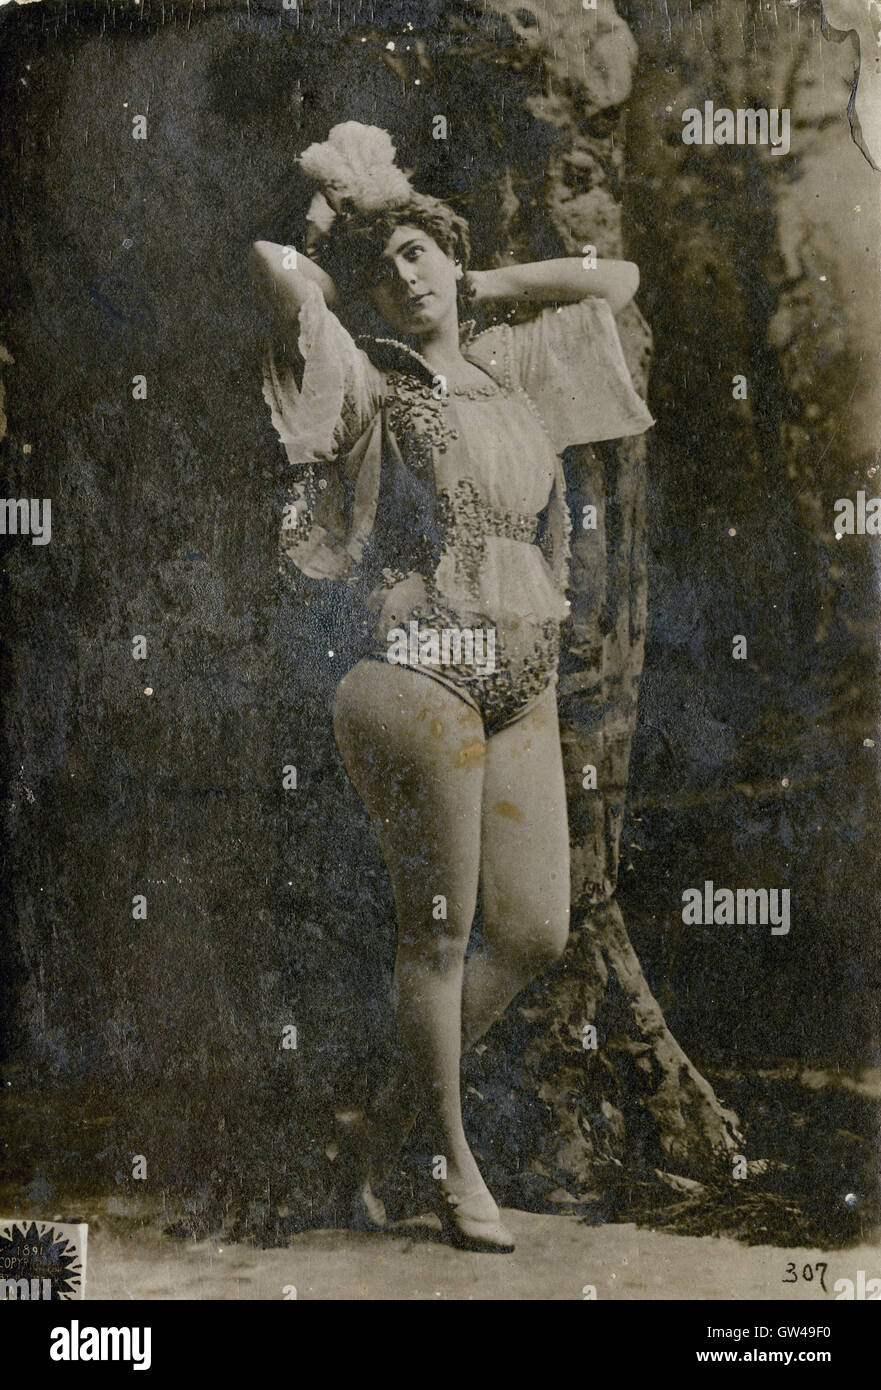 Antique 1891 cabinet card photograph of Jennie Joyce, produced as a promotional item for the Newsboy tobacco company. Jennie Joyce was an actress in New York with a troubled personal life. SOURCE: ORIGINAL PHOTOGRAPH. Stock Photo